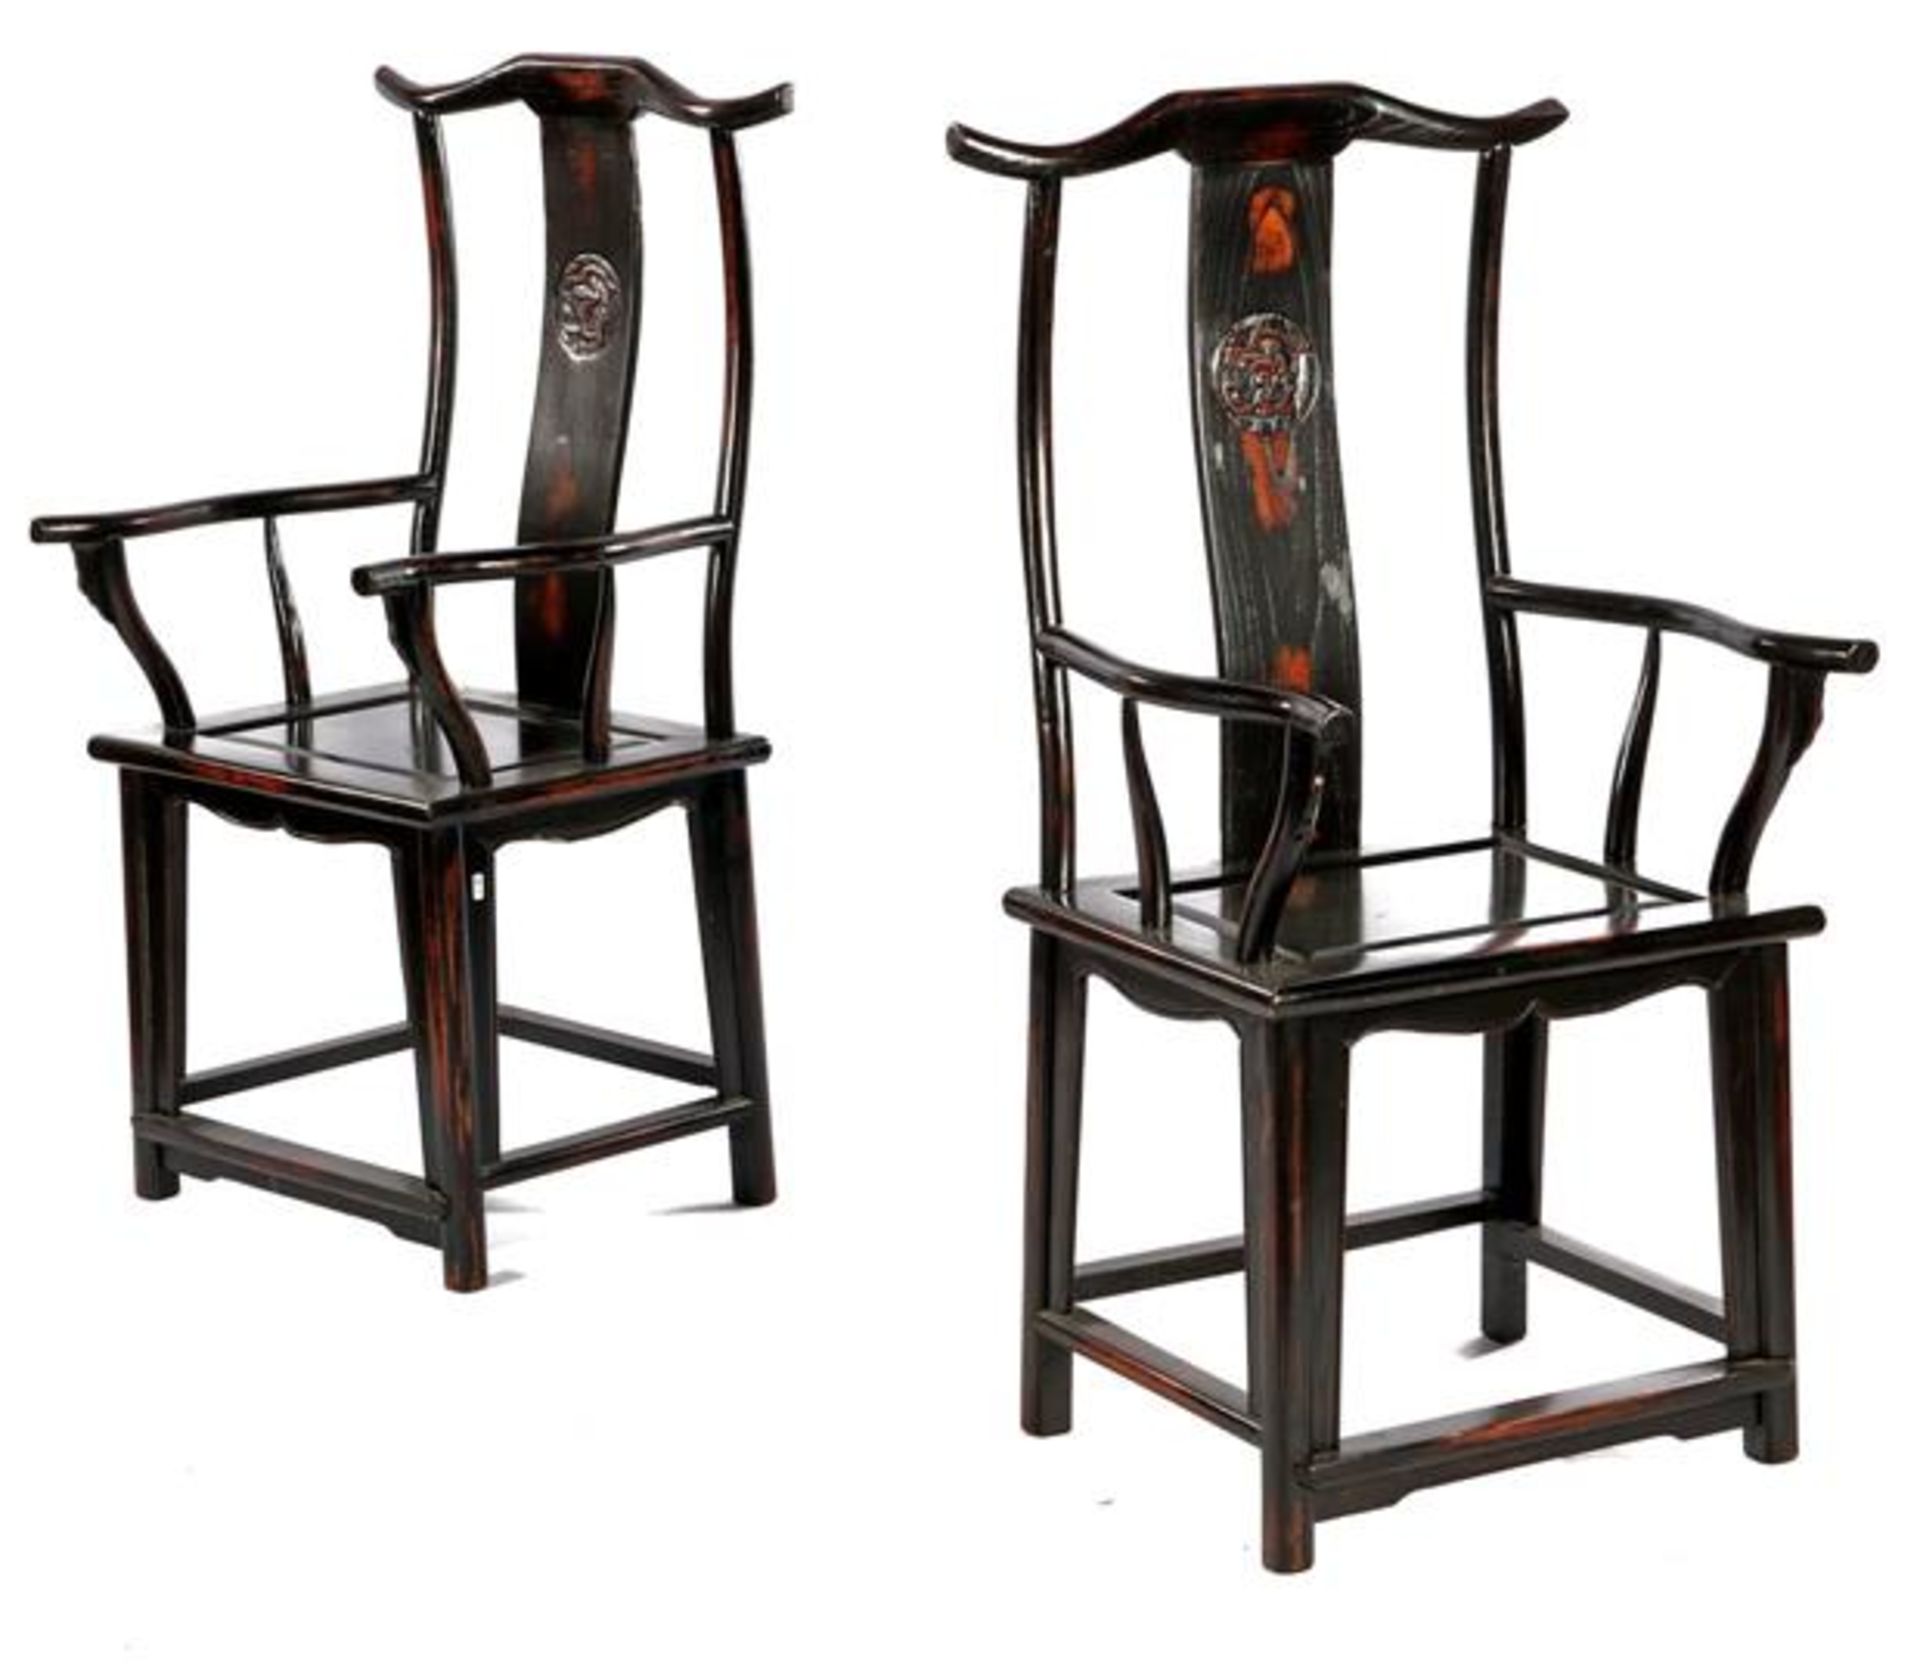 2 lacquered armchairs with medallion in the back, China ca.1960, backrest 120 cm high